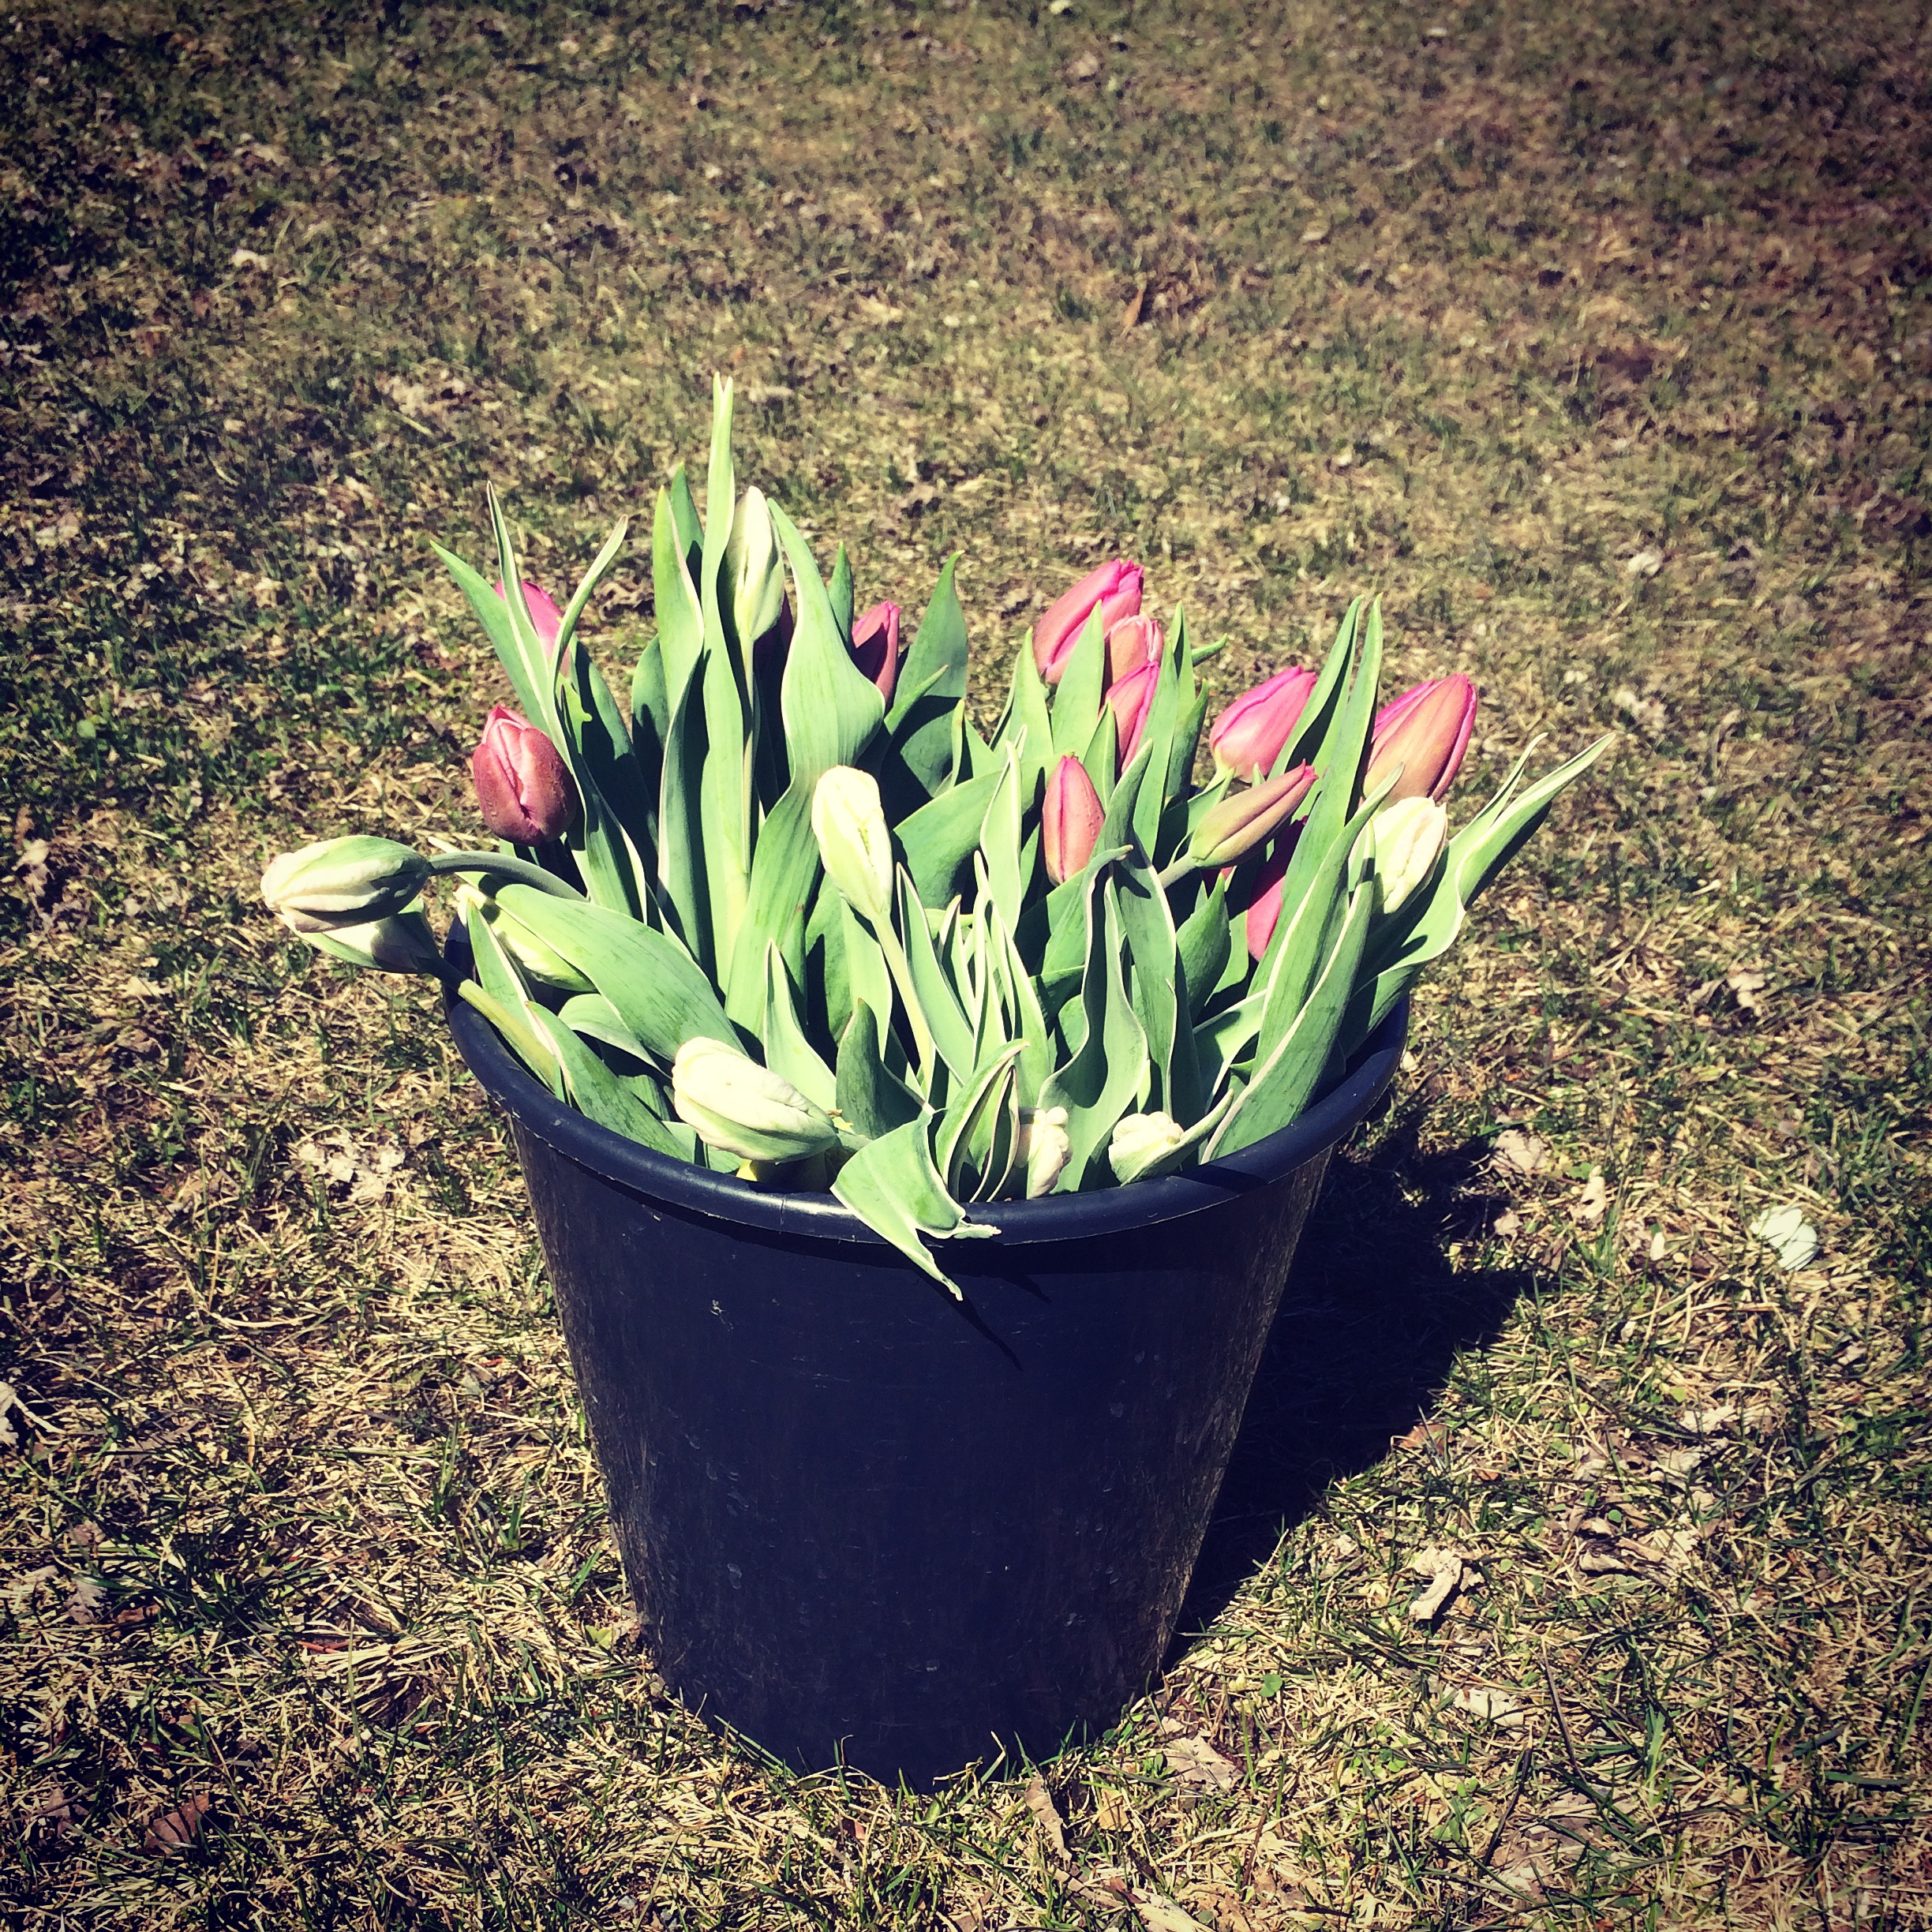  First tulips 